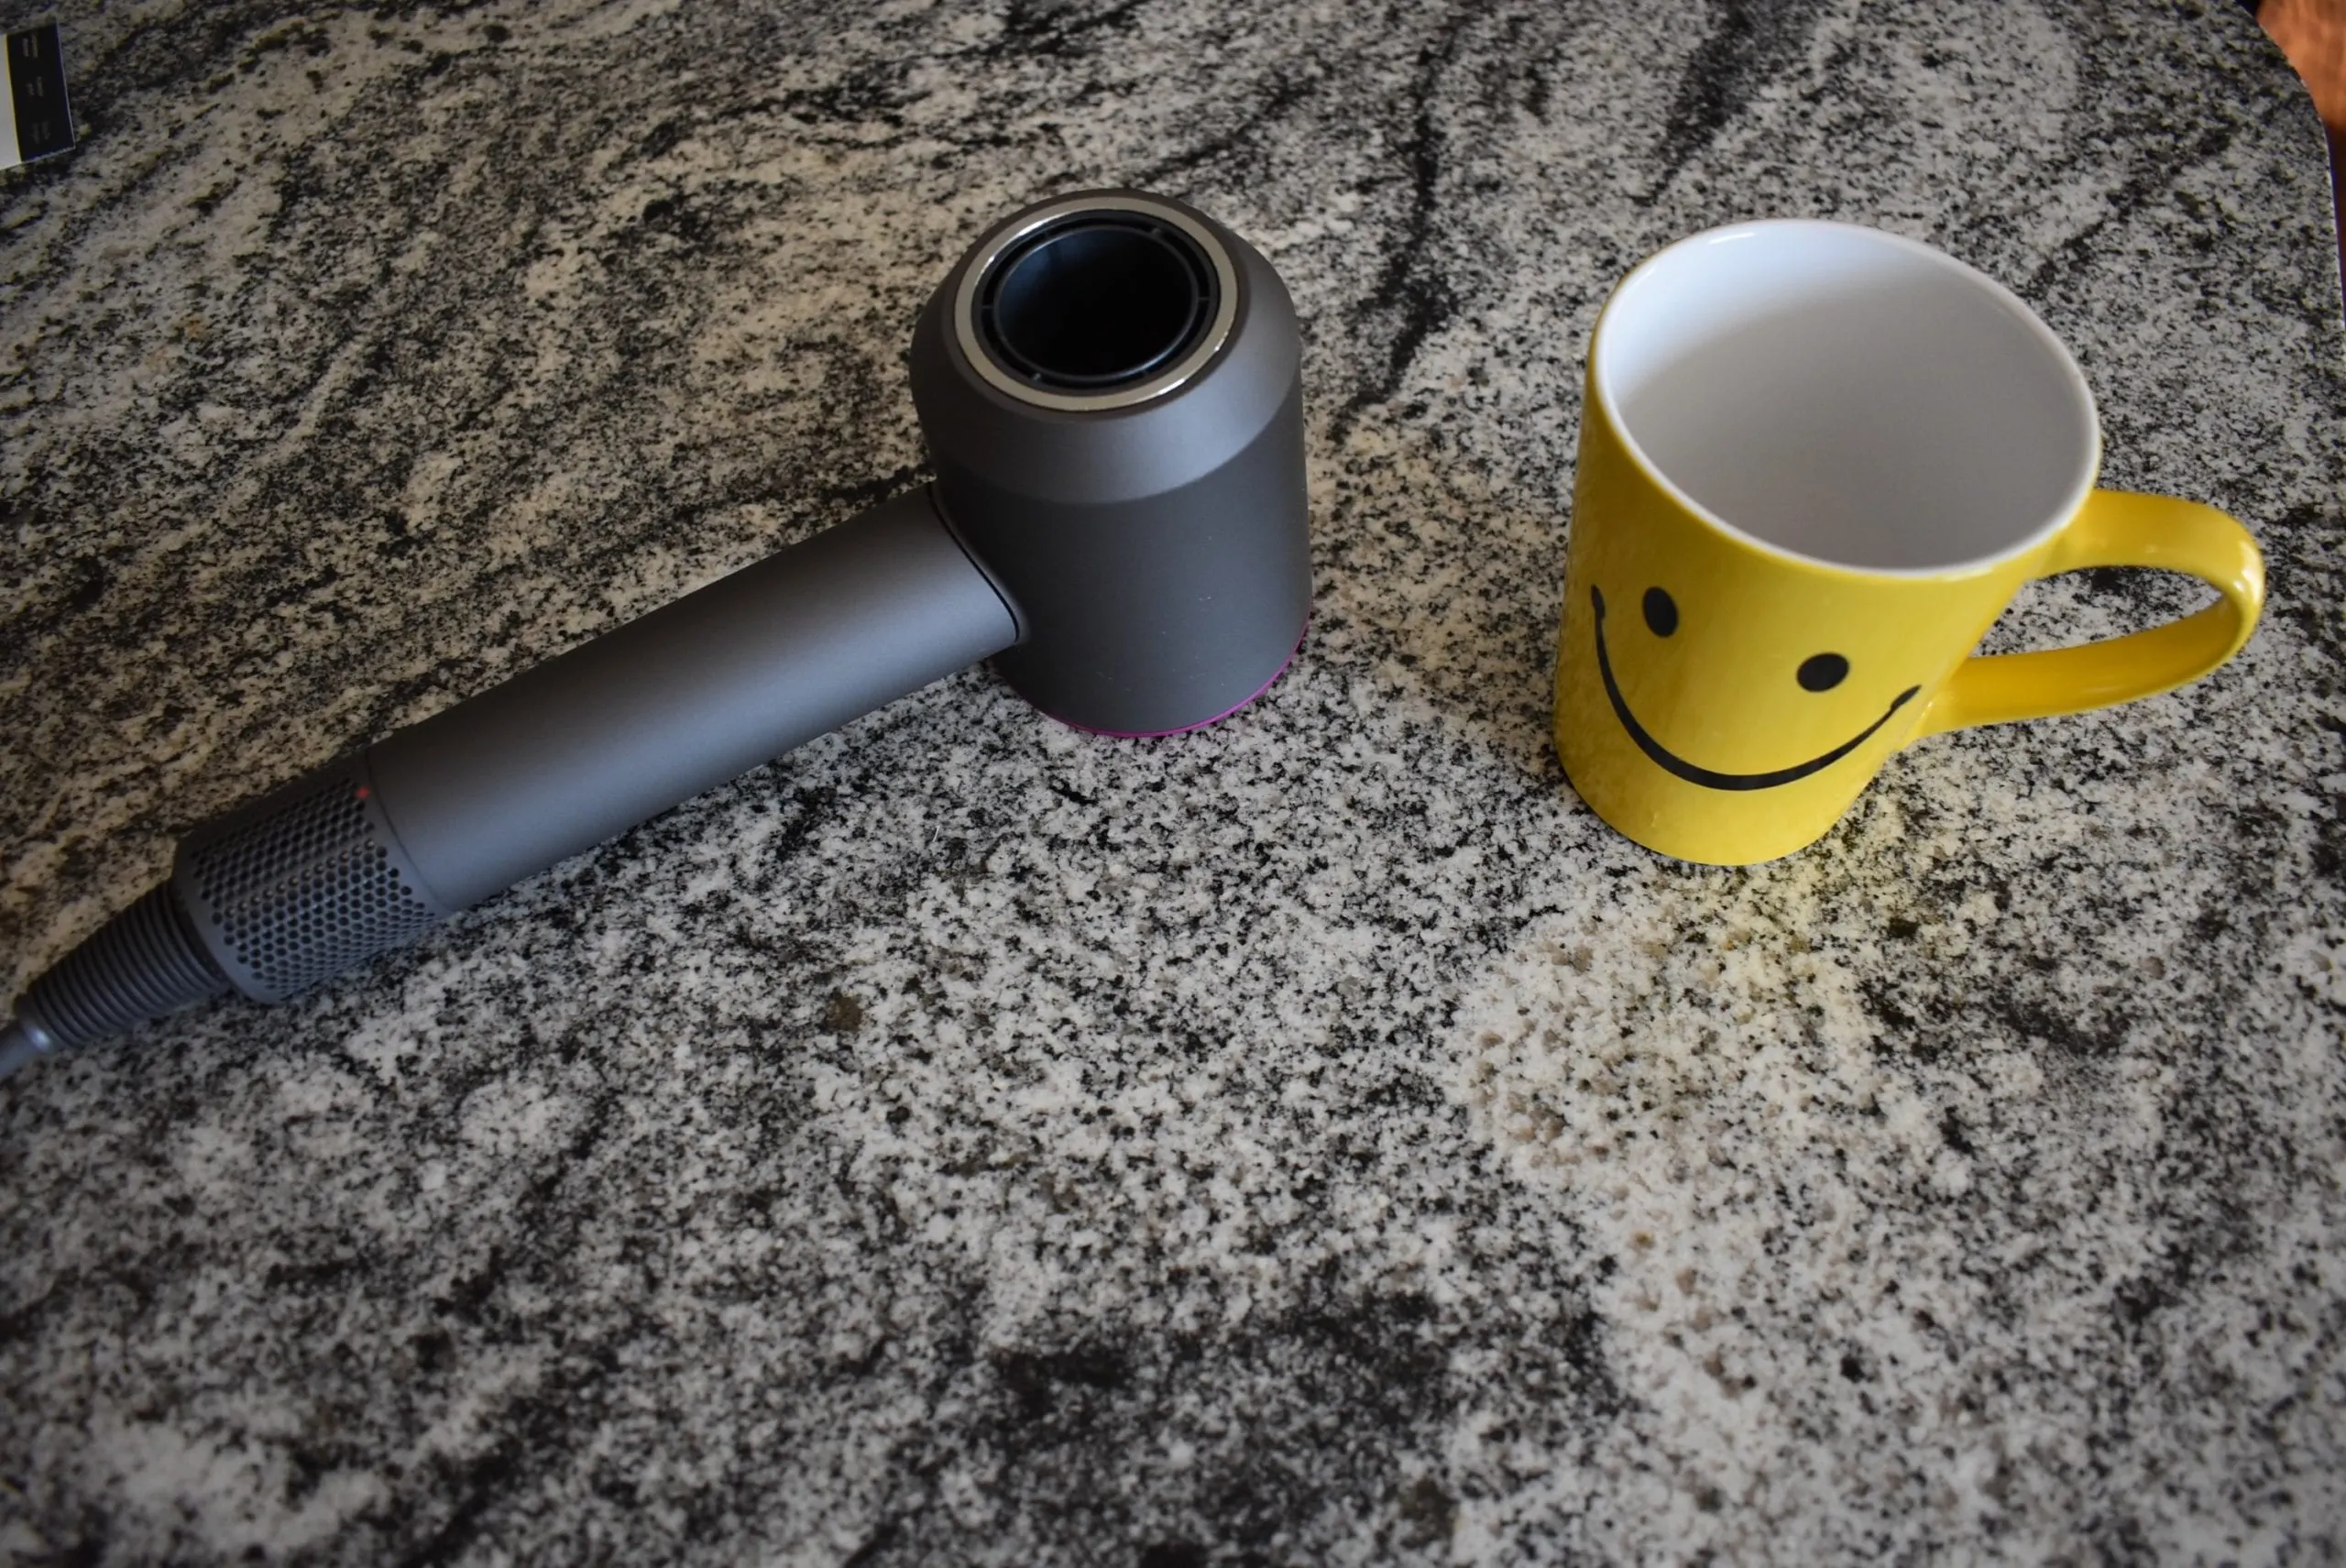 The dyson hair dryer sitting on a counter next to a yellow happy face mug